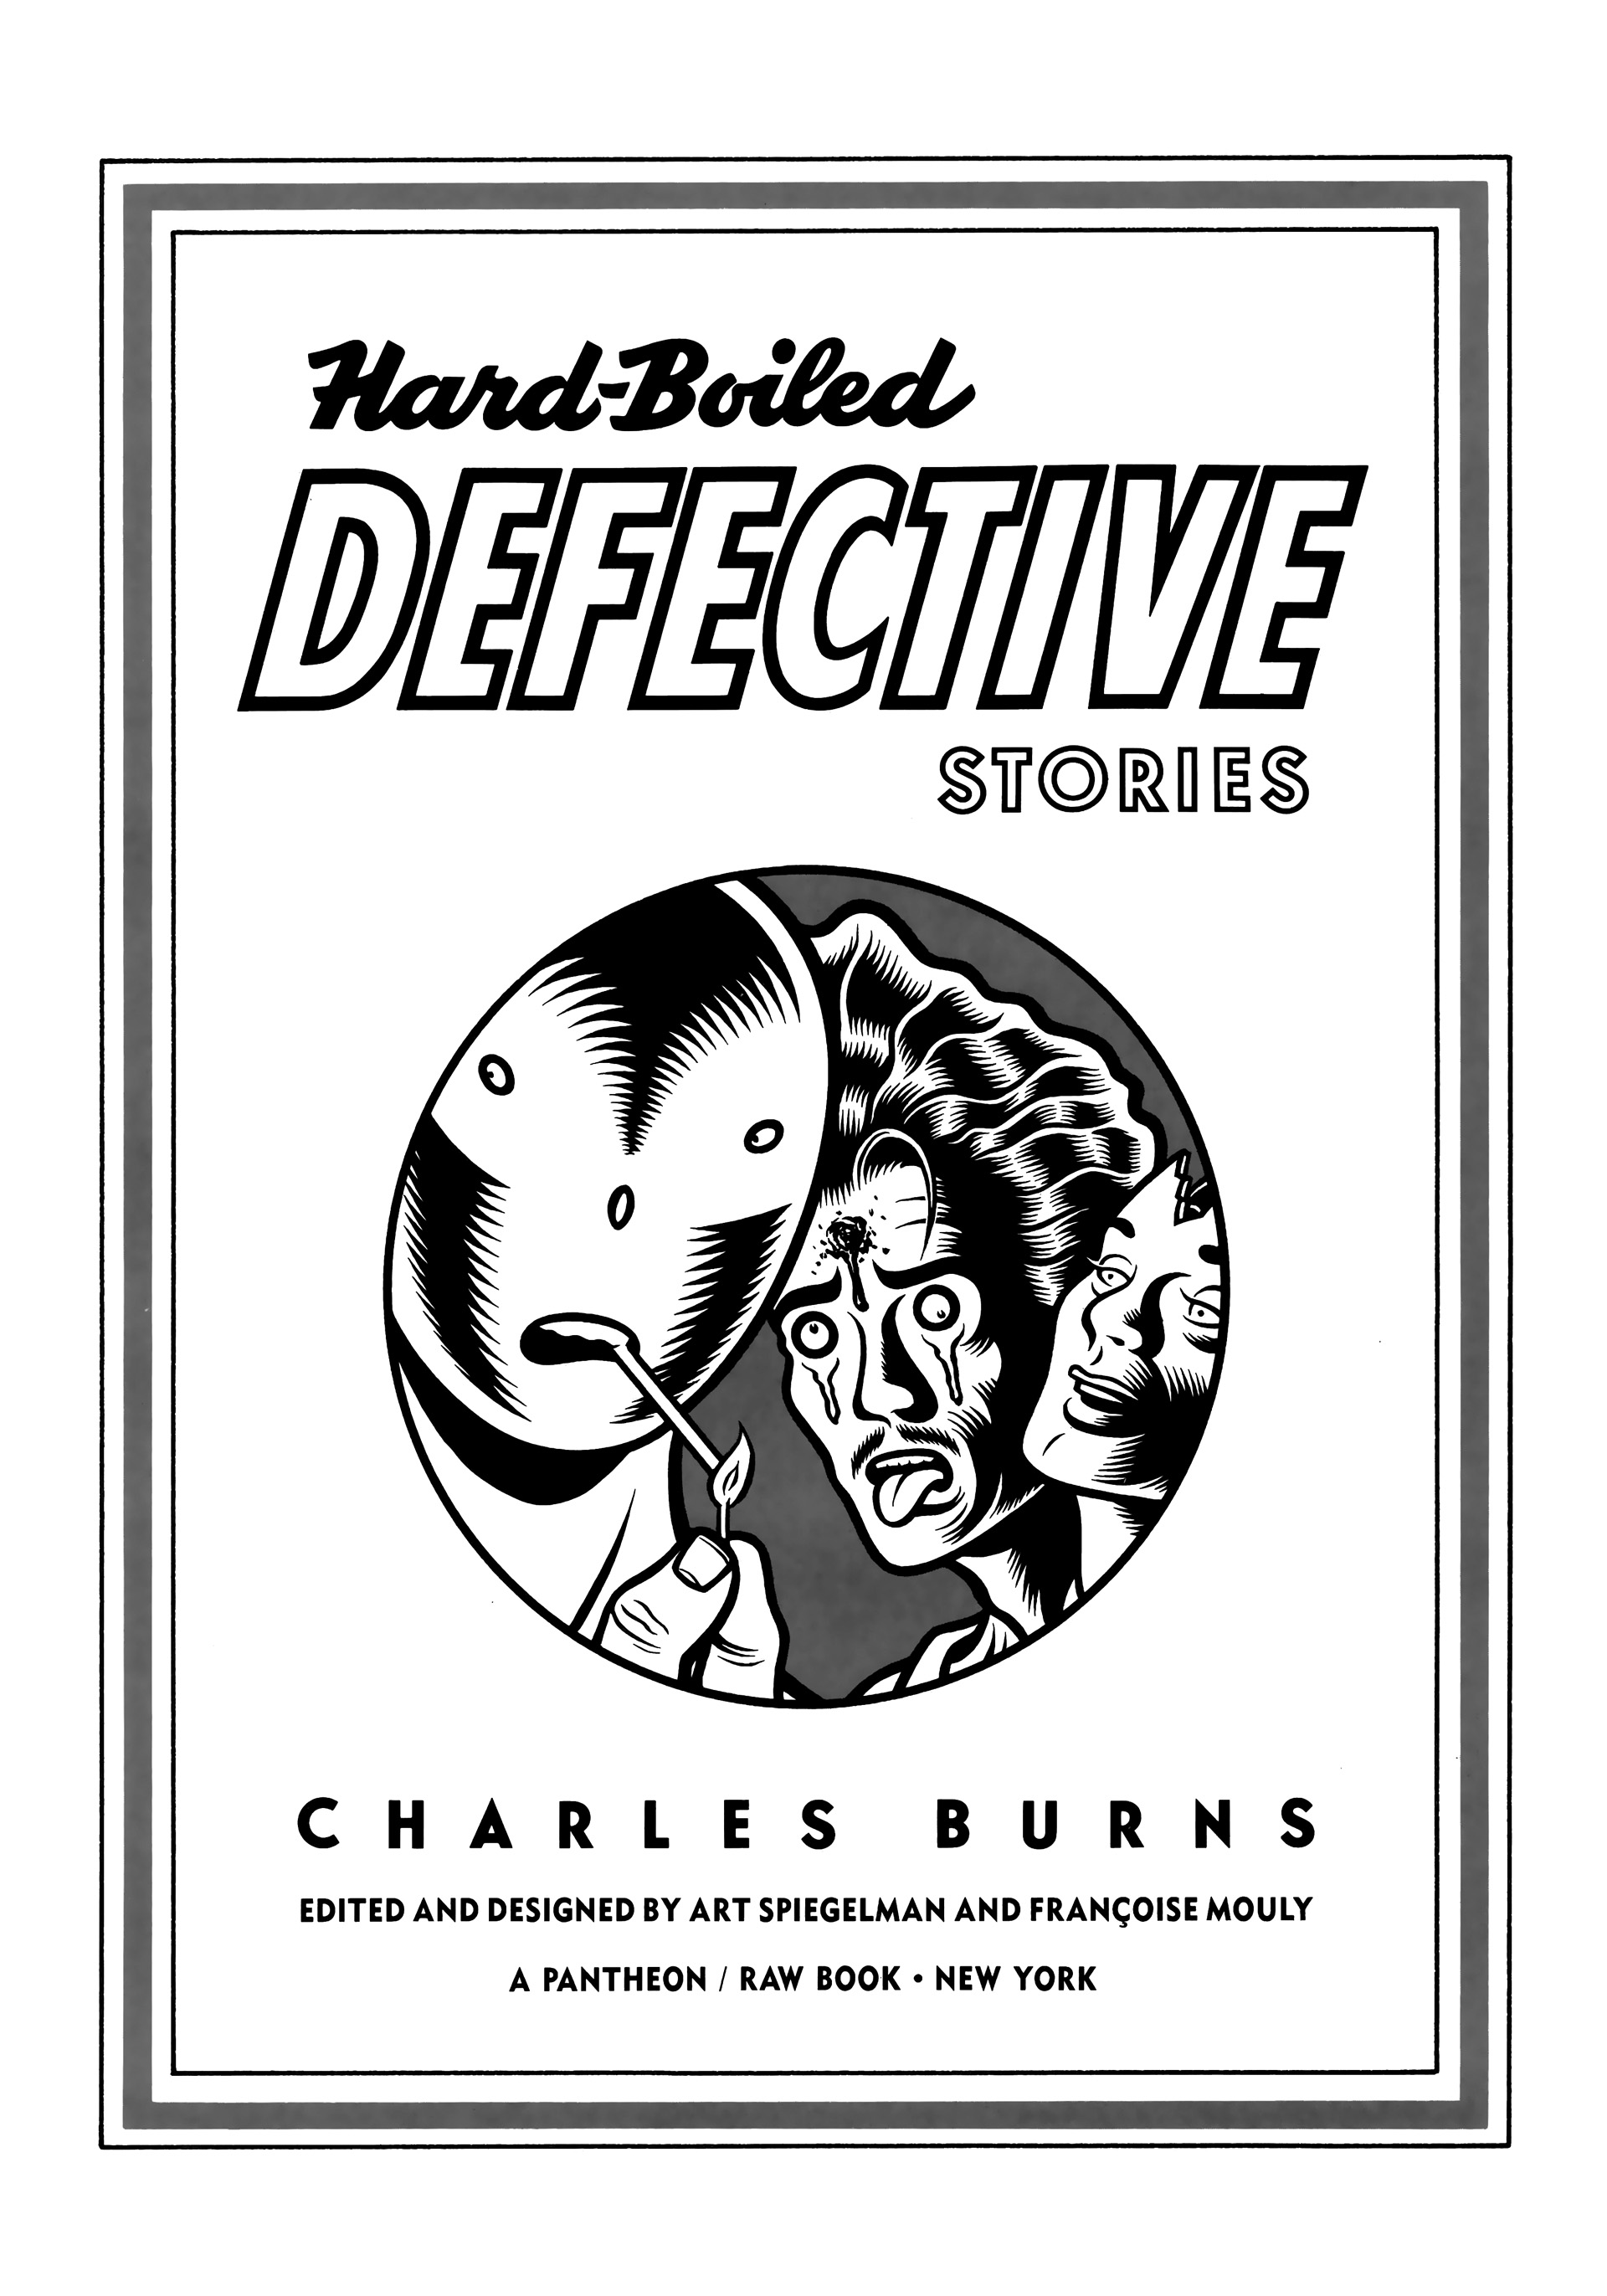 Read online Hard-Boiled Defective Stories comic -  Issue # TPB - 4